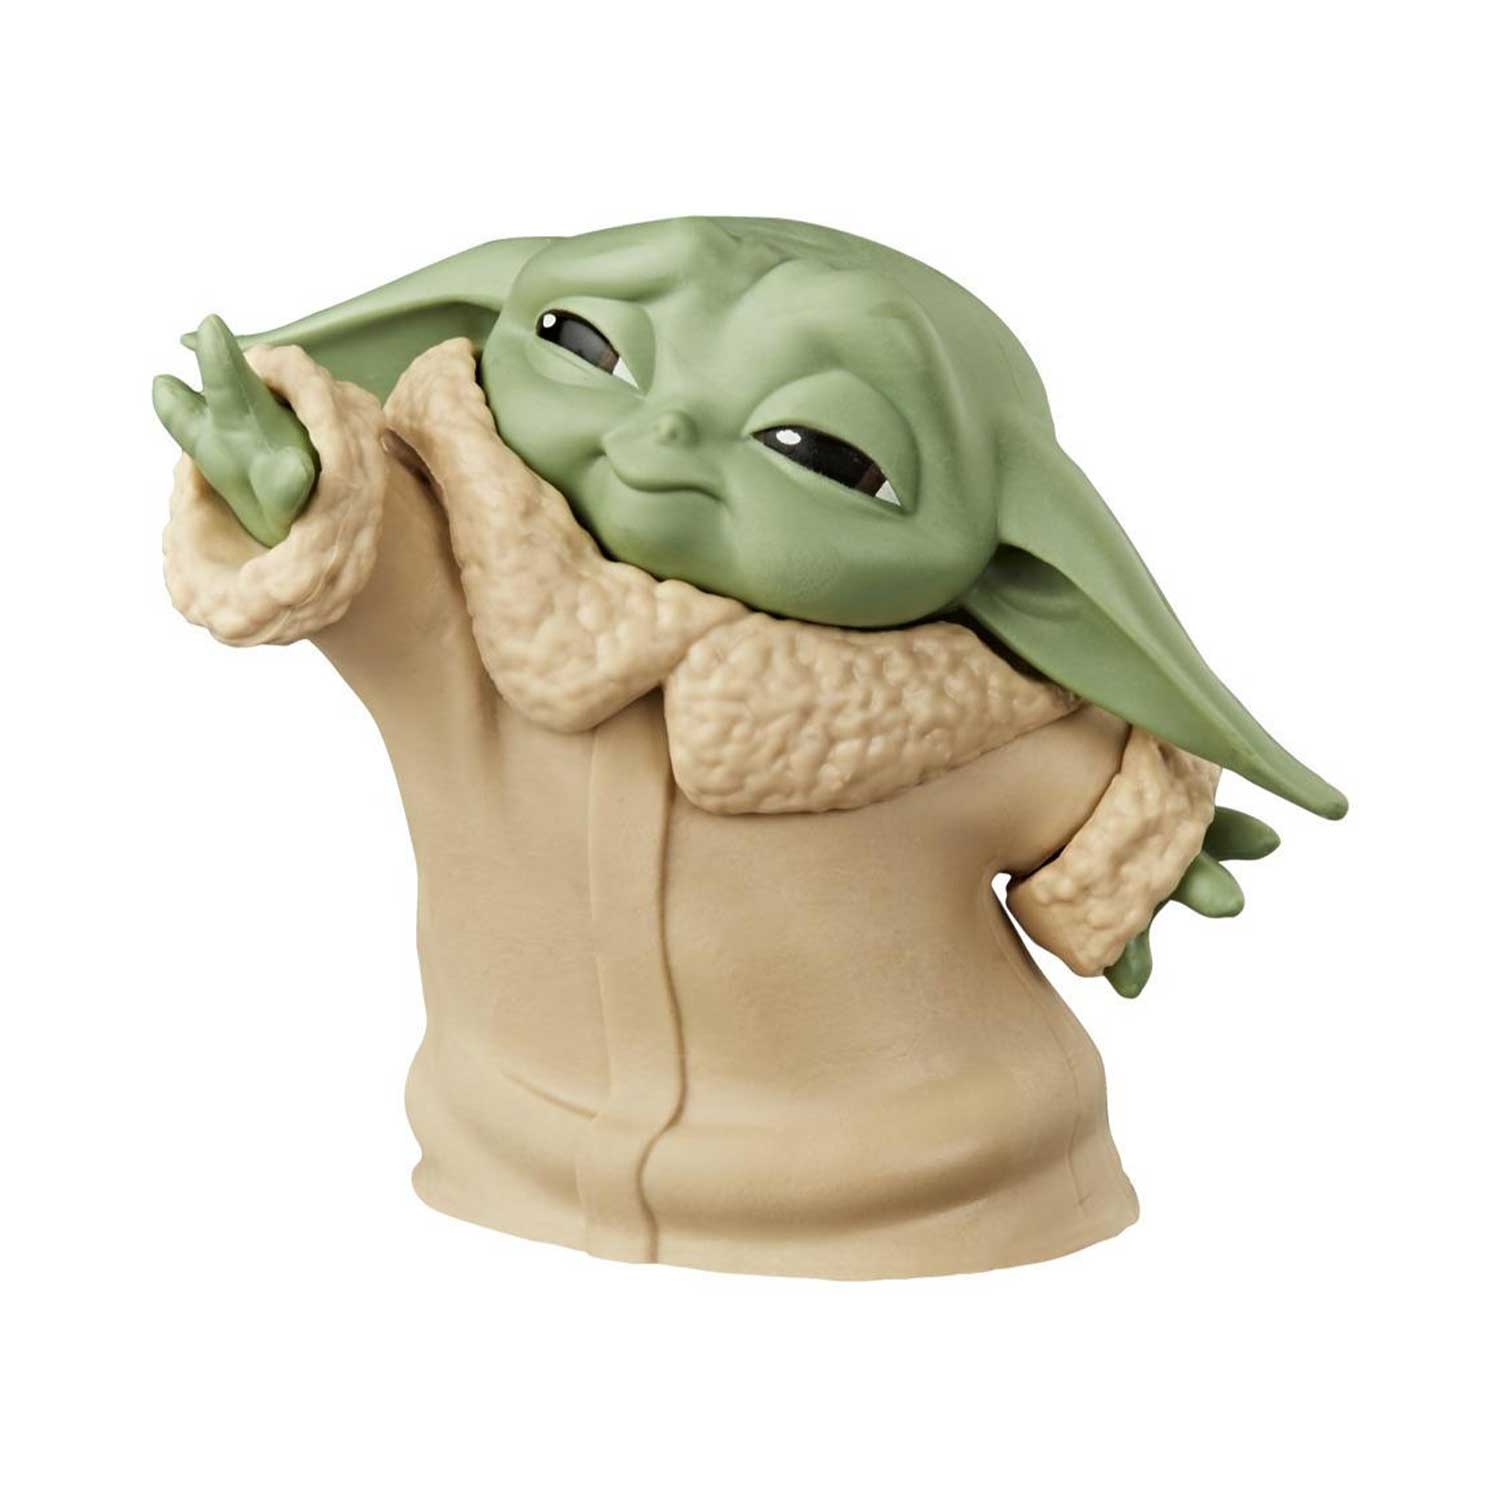 Star Wars The Bounty Collection The Child Collectible Toy 2.2-Inch The Mandalorian “Baby Yoda” Force Moment Pose Figure - Mod: HSBF12175L0